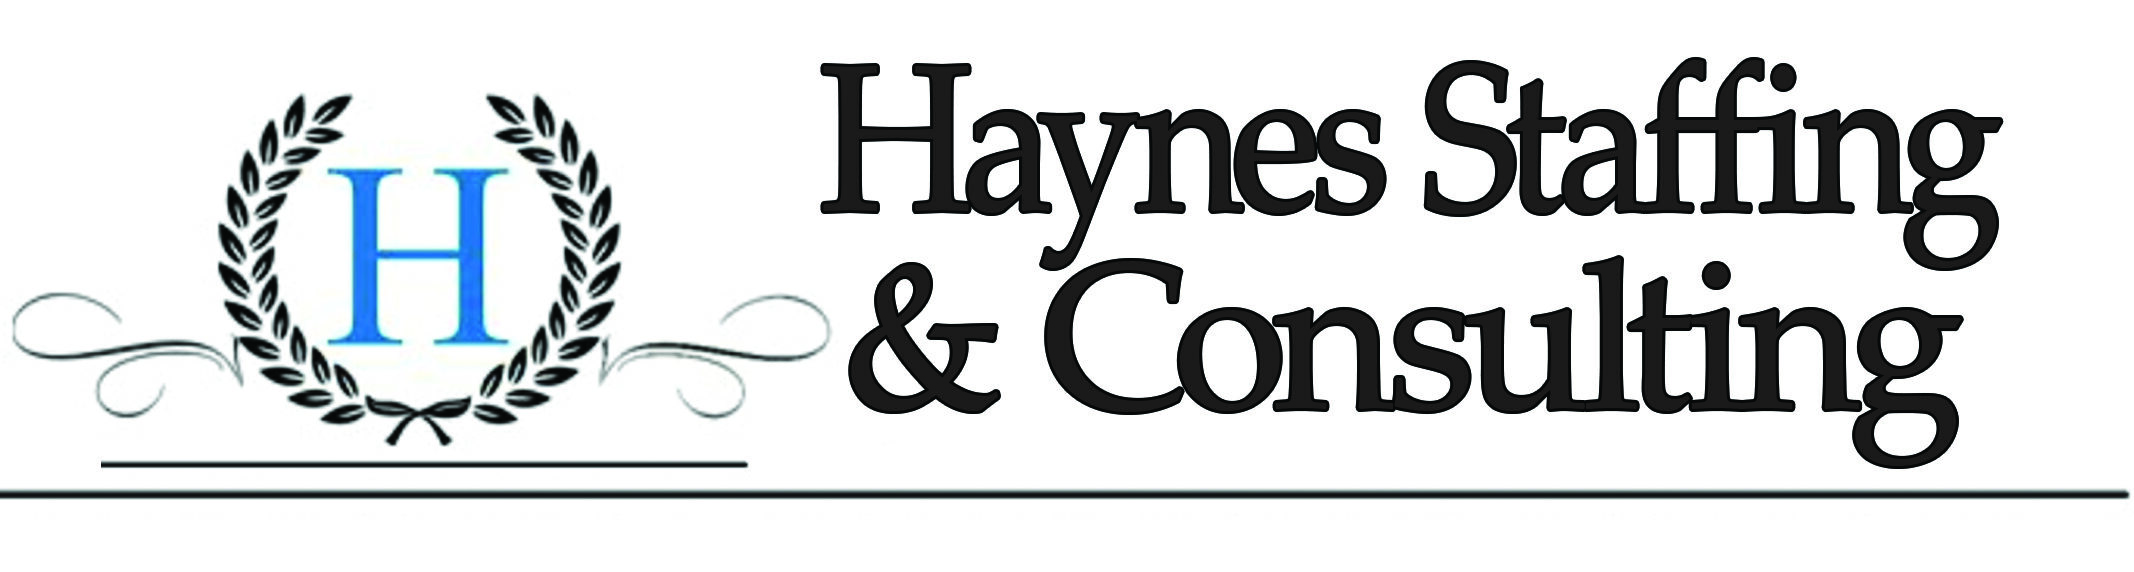 Haynes Staffing & Consulting – HSC outsourcing talent creates value to your company